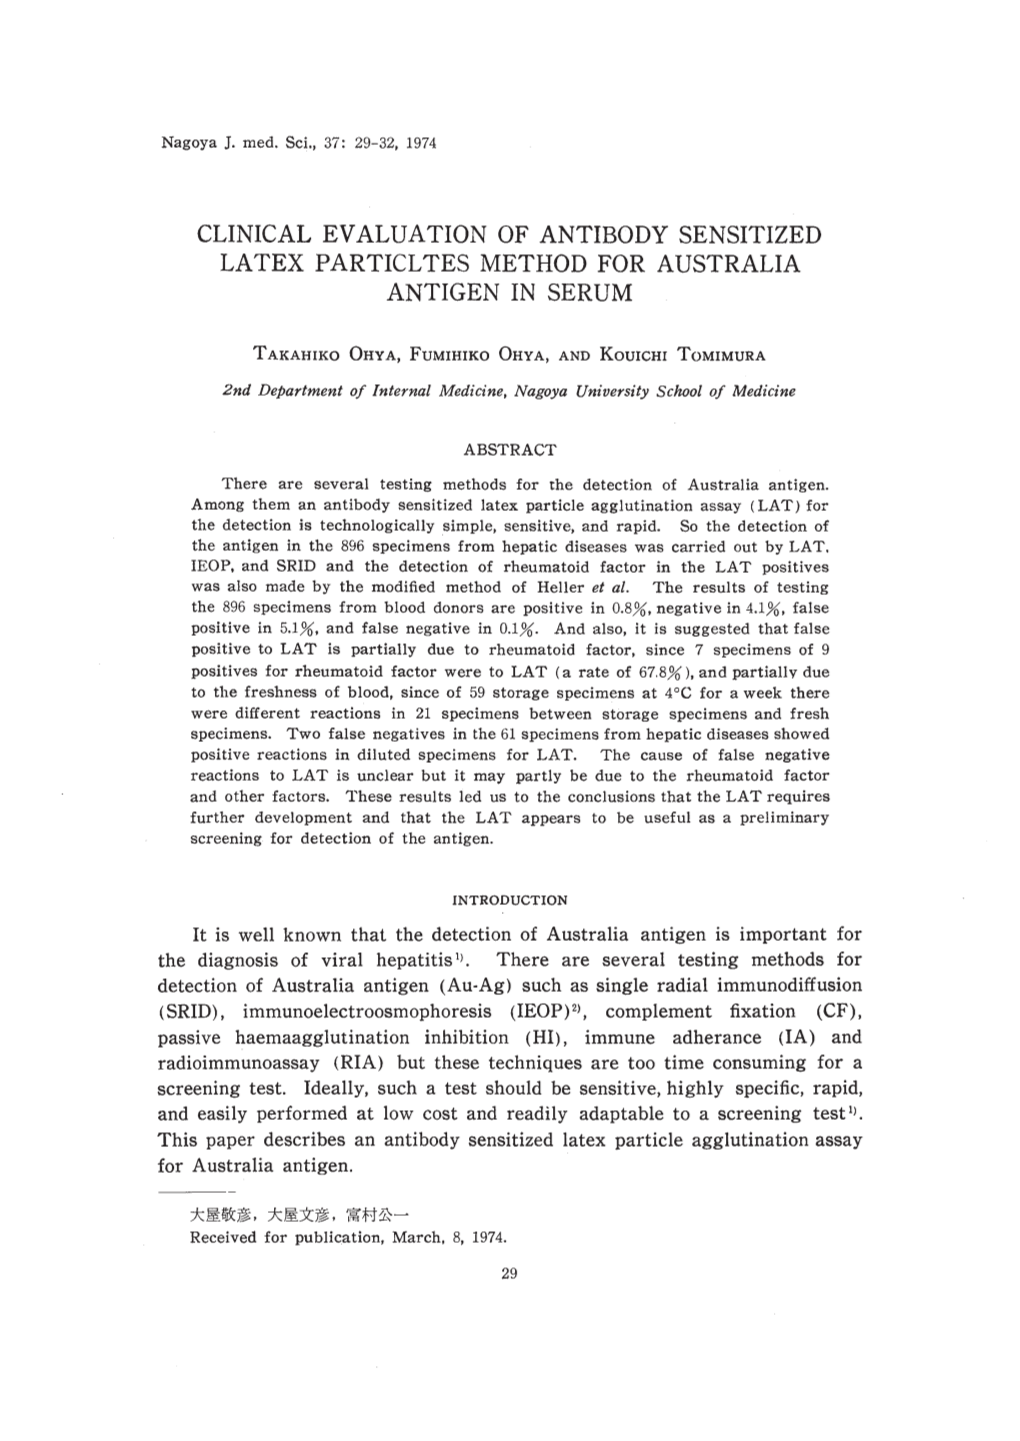 Clinical Evaluation of Antibody Sensitized Latex Particltes Method for Australia Antigen in Serum